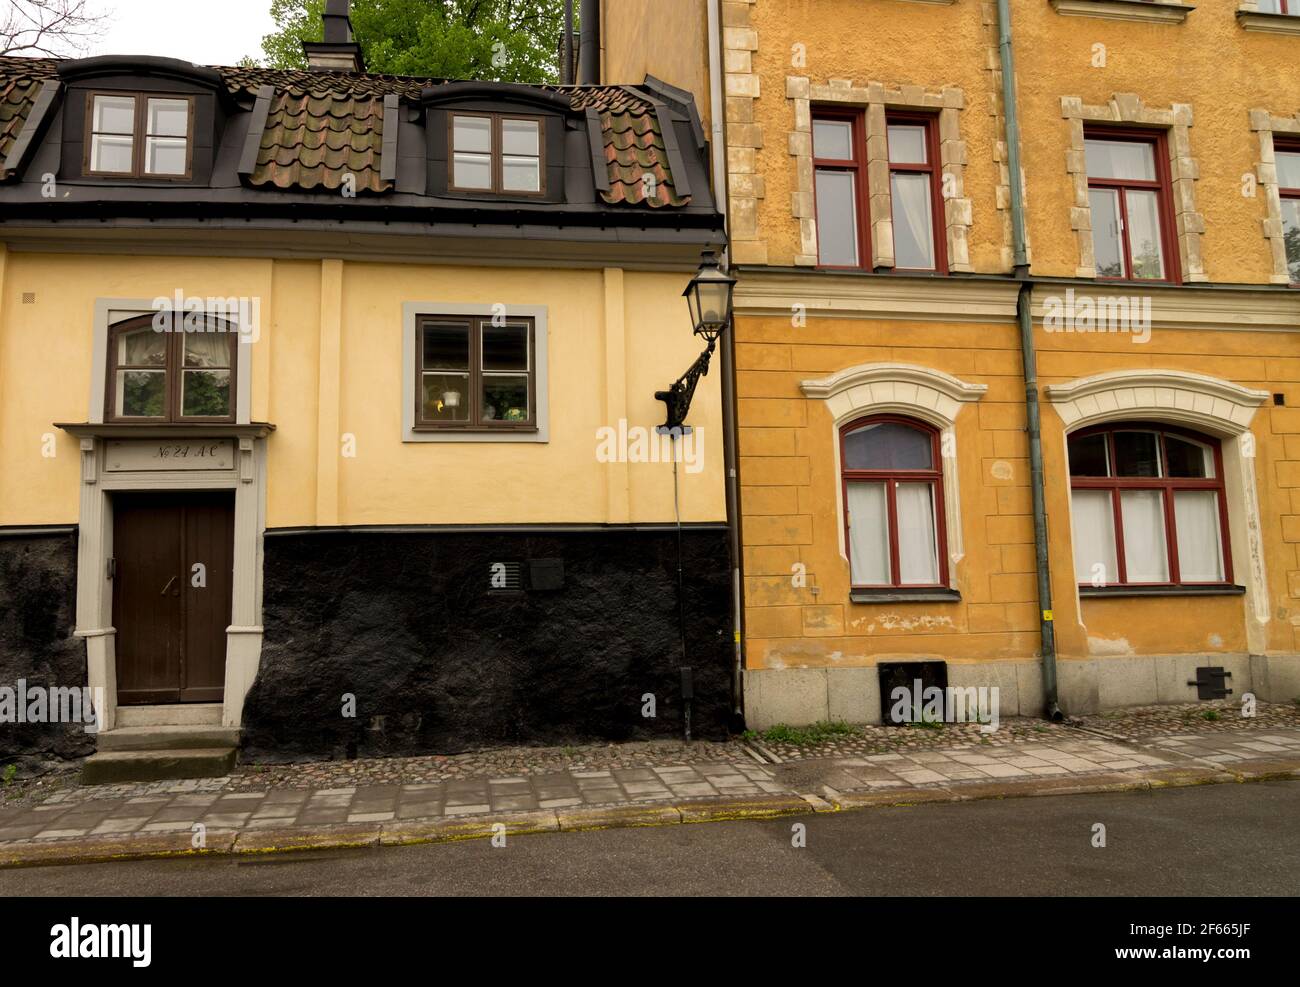 Old buildings in Fjallgatan, an historic street in the Katarina Sofia District of Stockholm, Sweden. Stock Photo